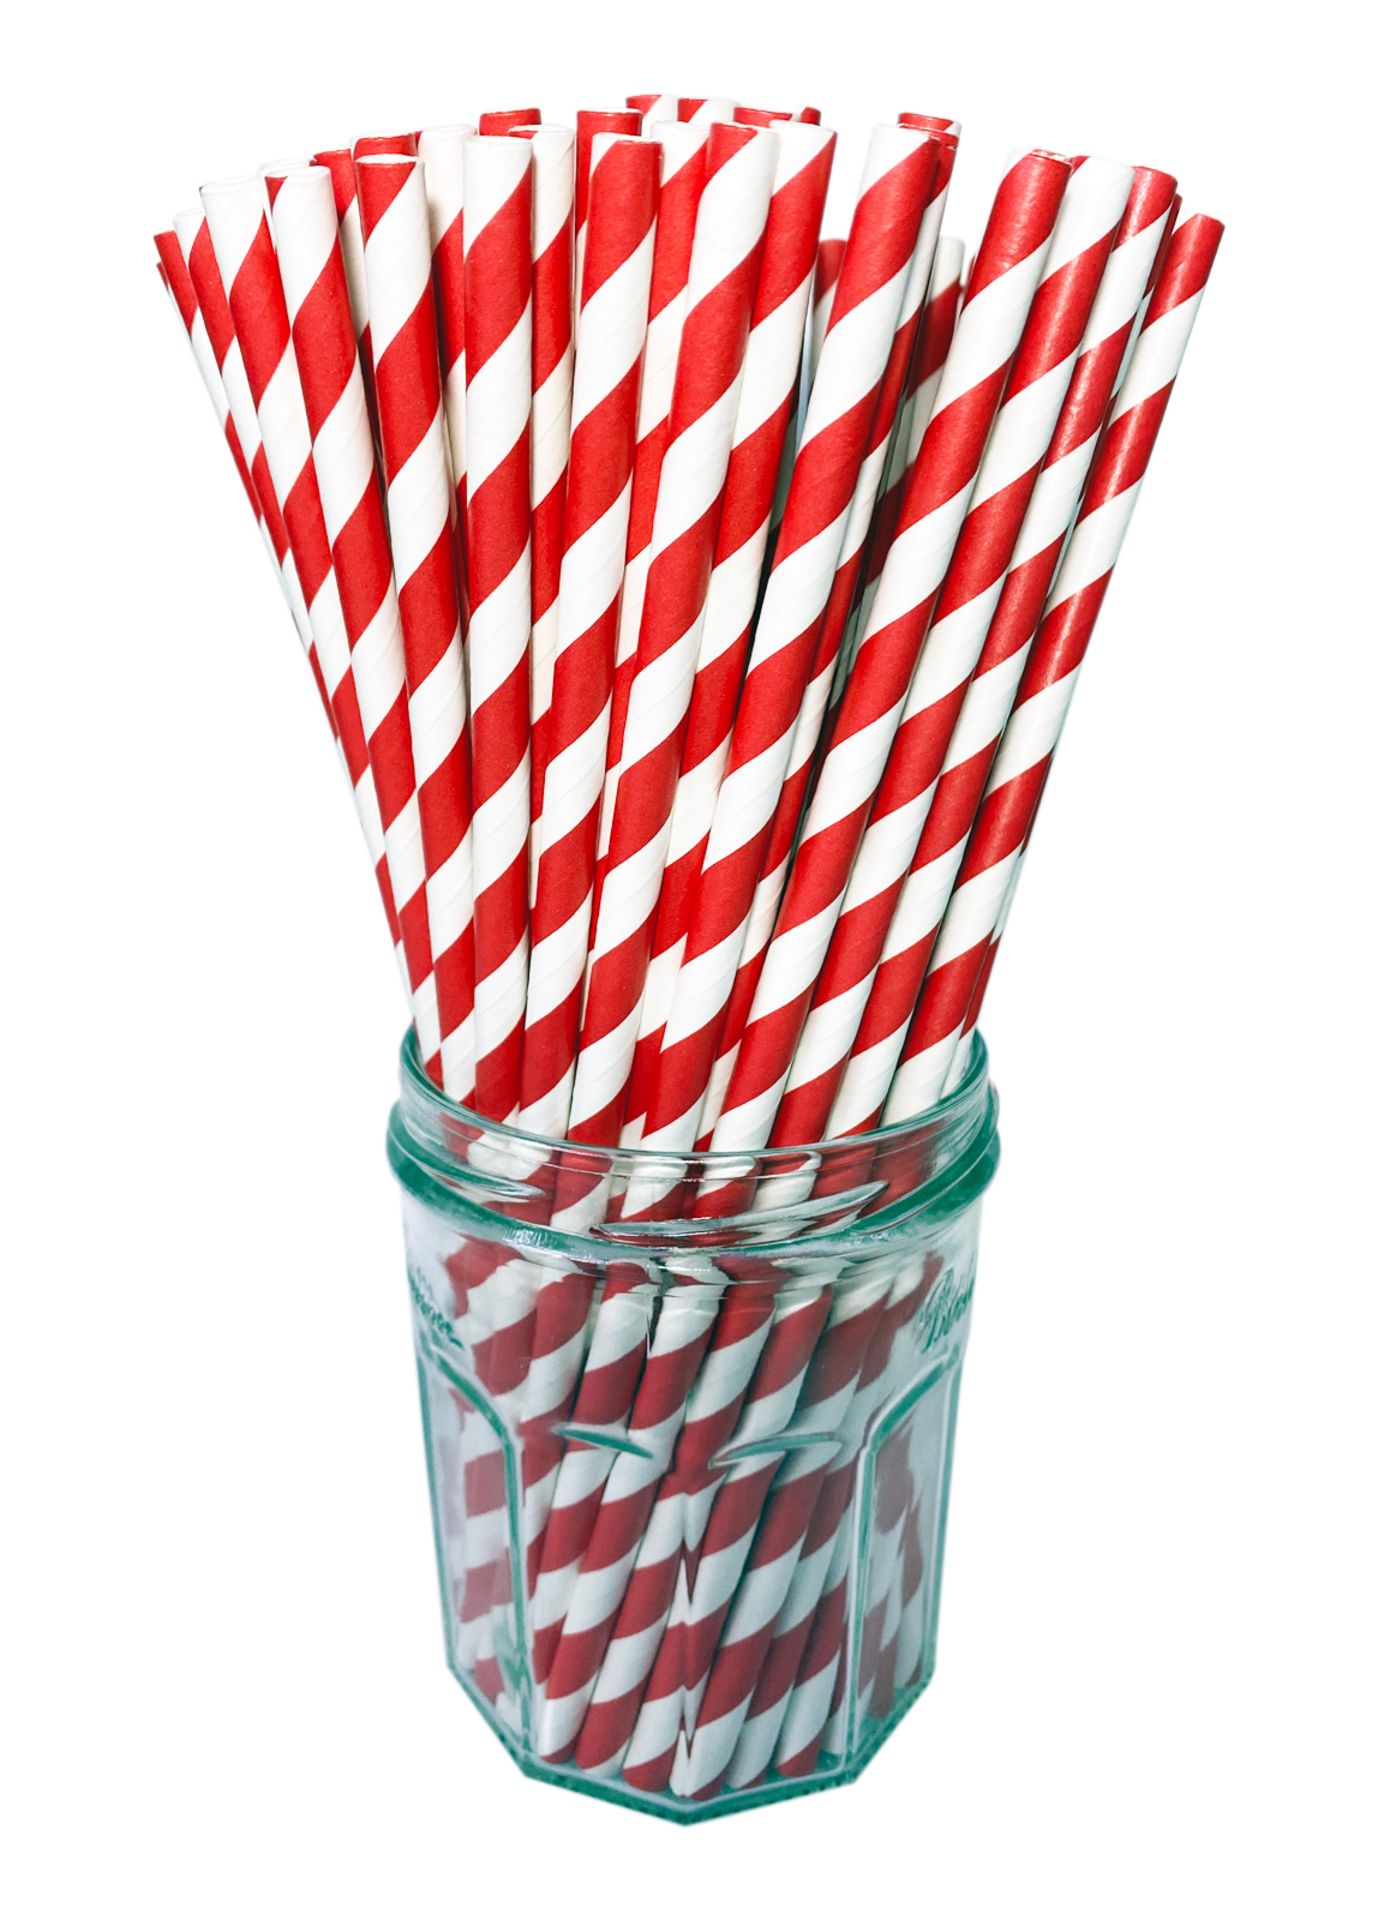 5 x Boxes of Candy Twist Paper Straws by 888 Gastro Disposables